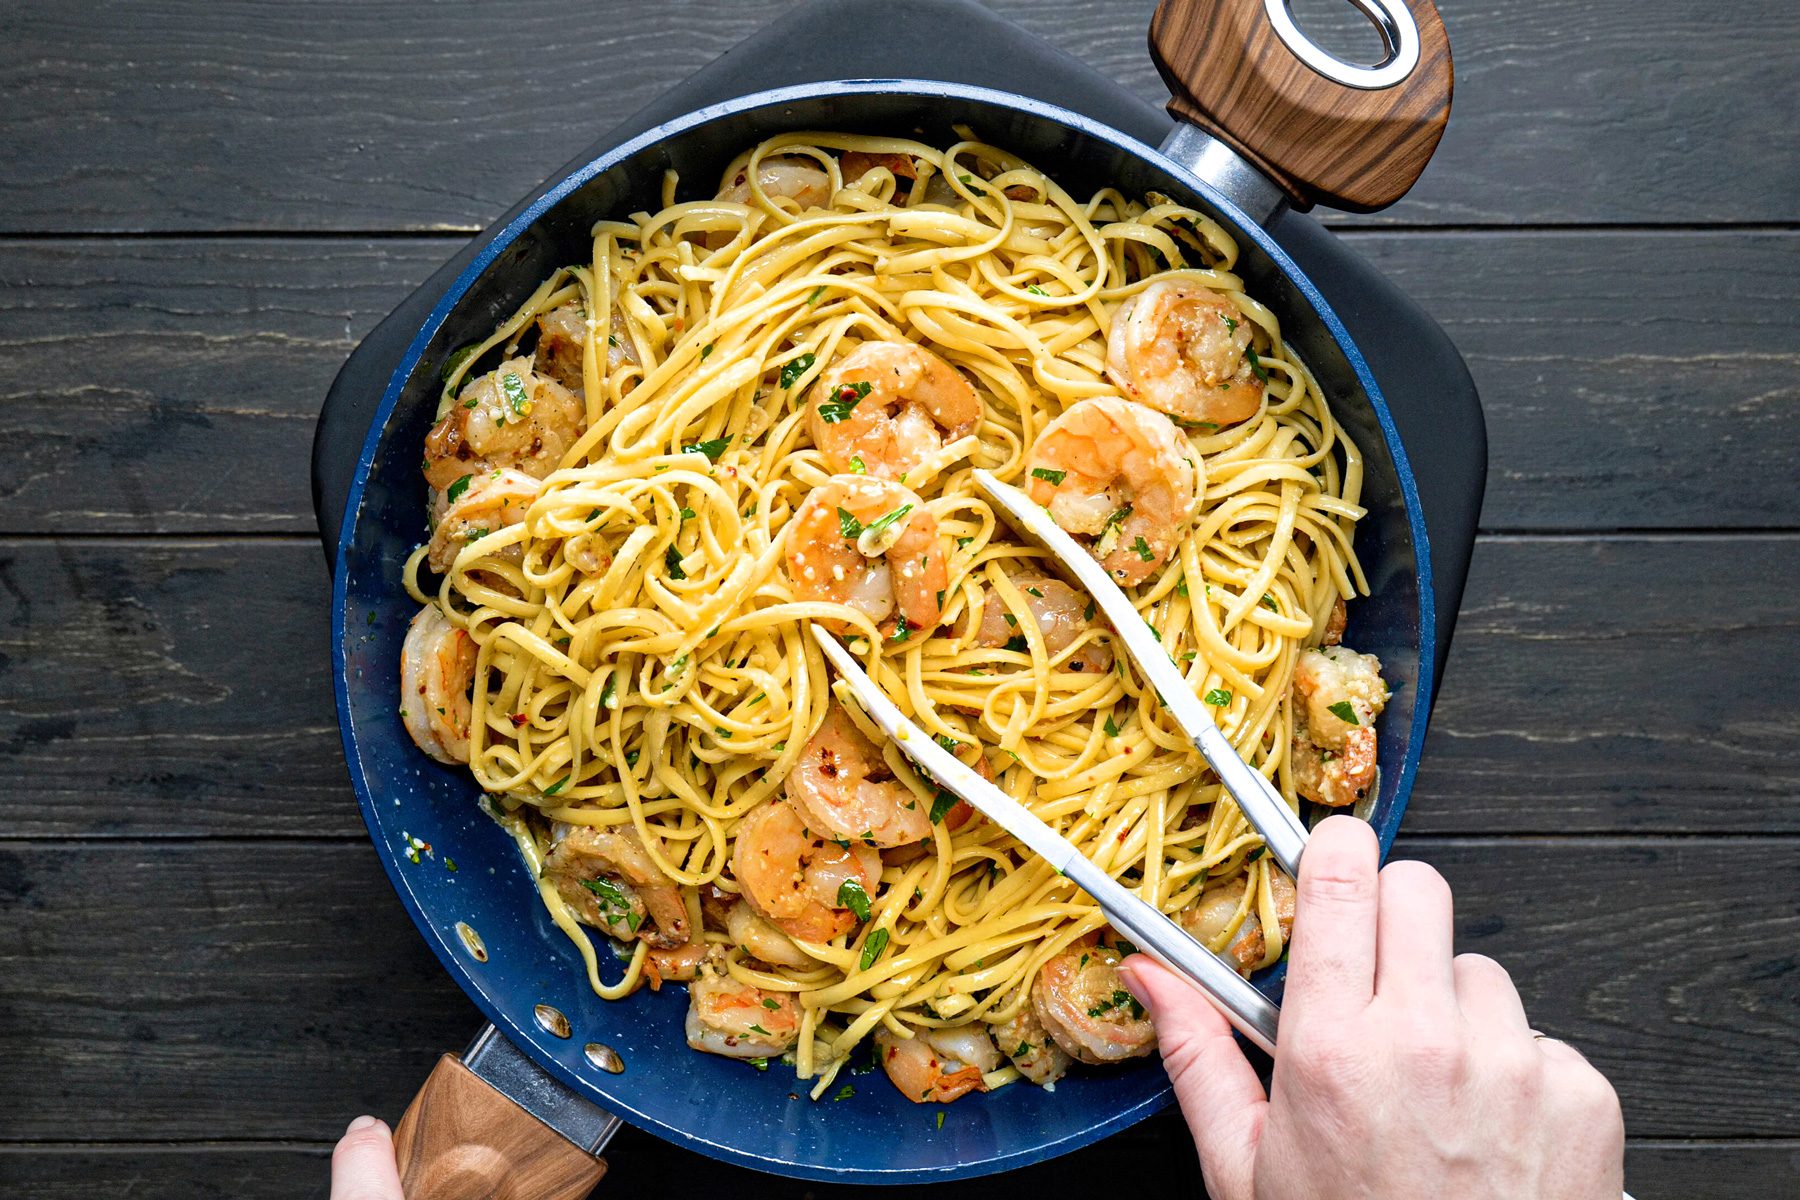 A person holding tongs to a bowl of pasta with shrimp